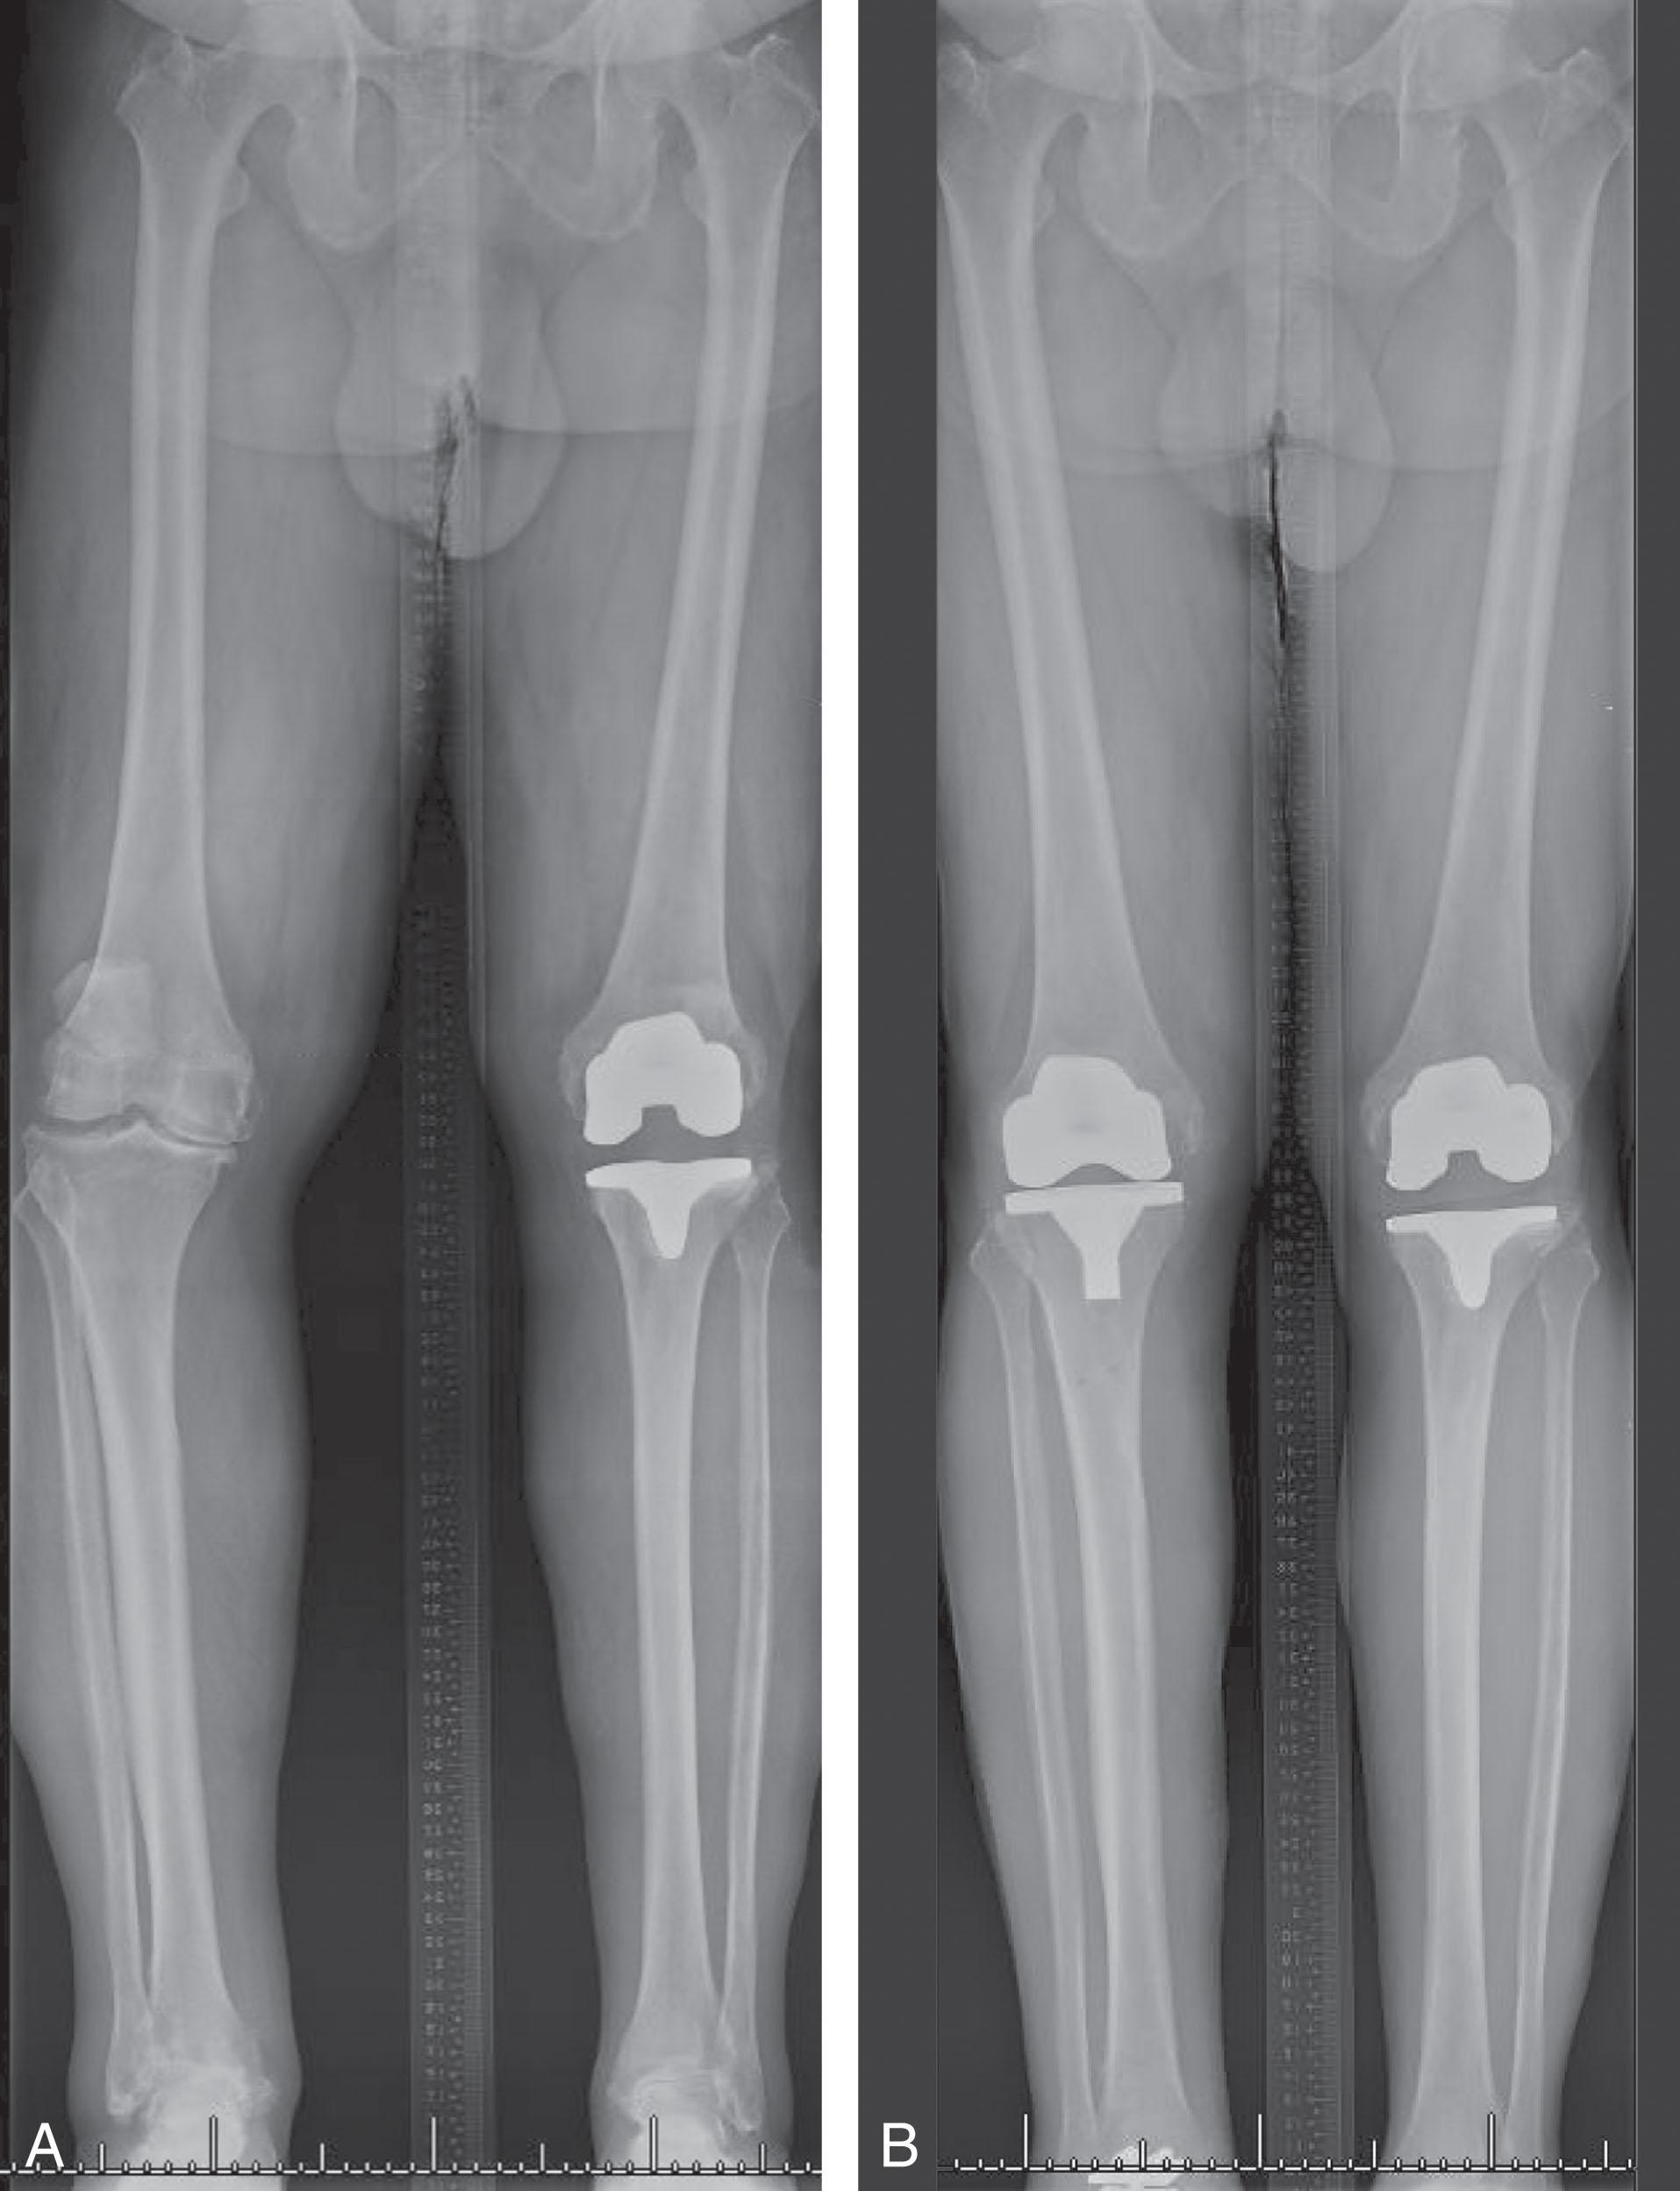 Fig. 23-12, Ankle malalignment related to genu varum. A , Hip to ankle anteroposterior radiograph showing ankle malalignment related to genu varum secondary to knee osteoarthritis. B , Hip to ankle anteroposterior radiograph after concurrent total knee and total ankle arthroplasty showing normalized limb alignment and well-placed knee and ankle prostheses.